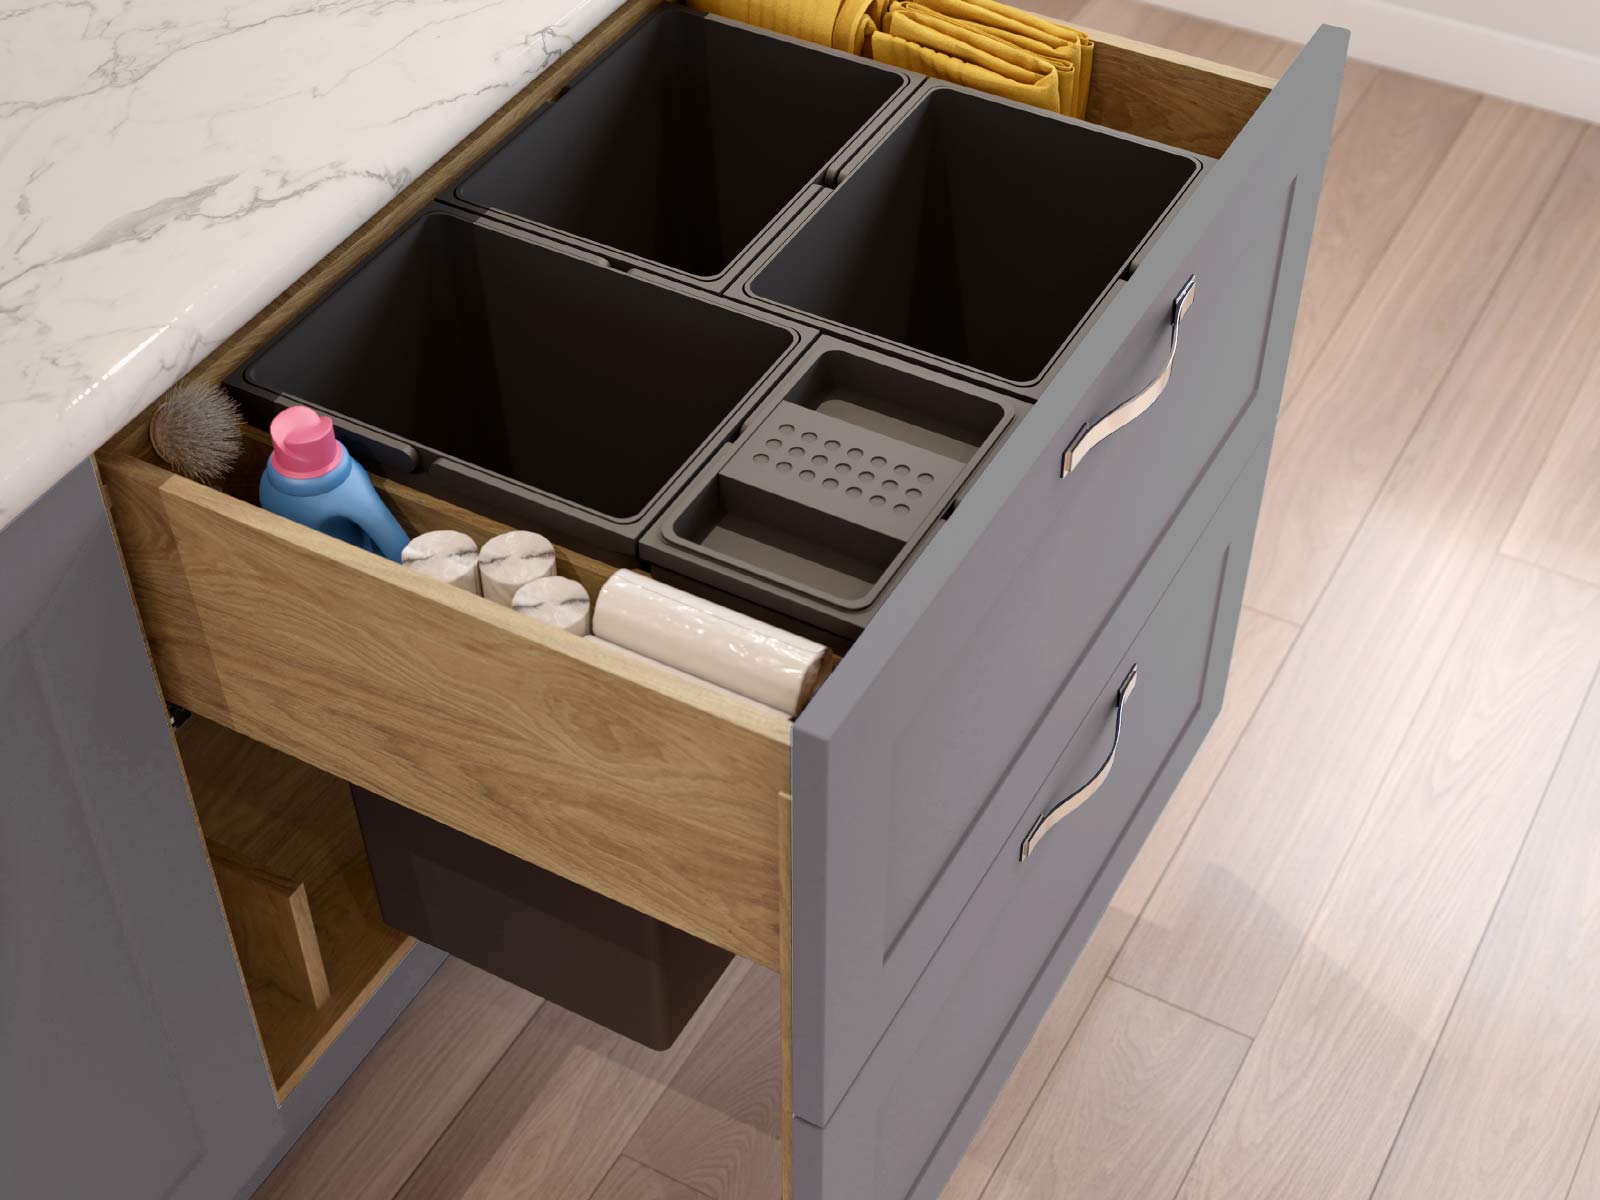 A pull-out kitchen bin for recycling with an odour filter lid